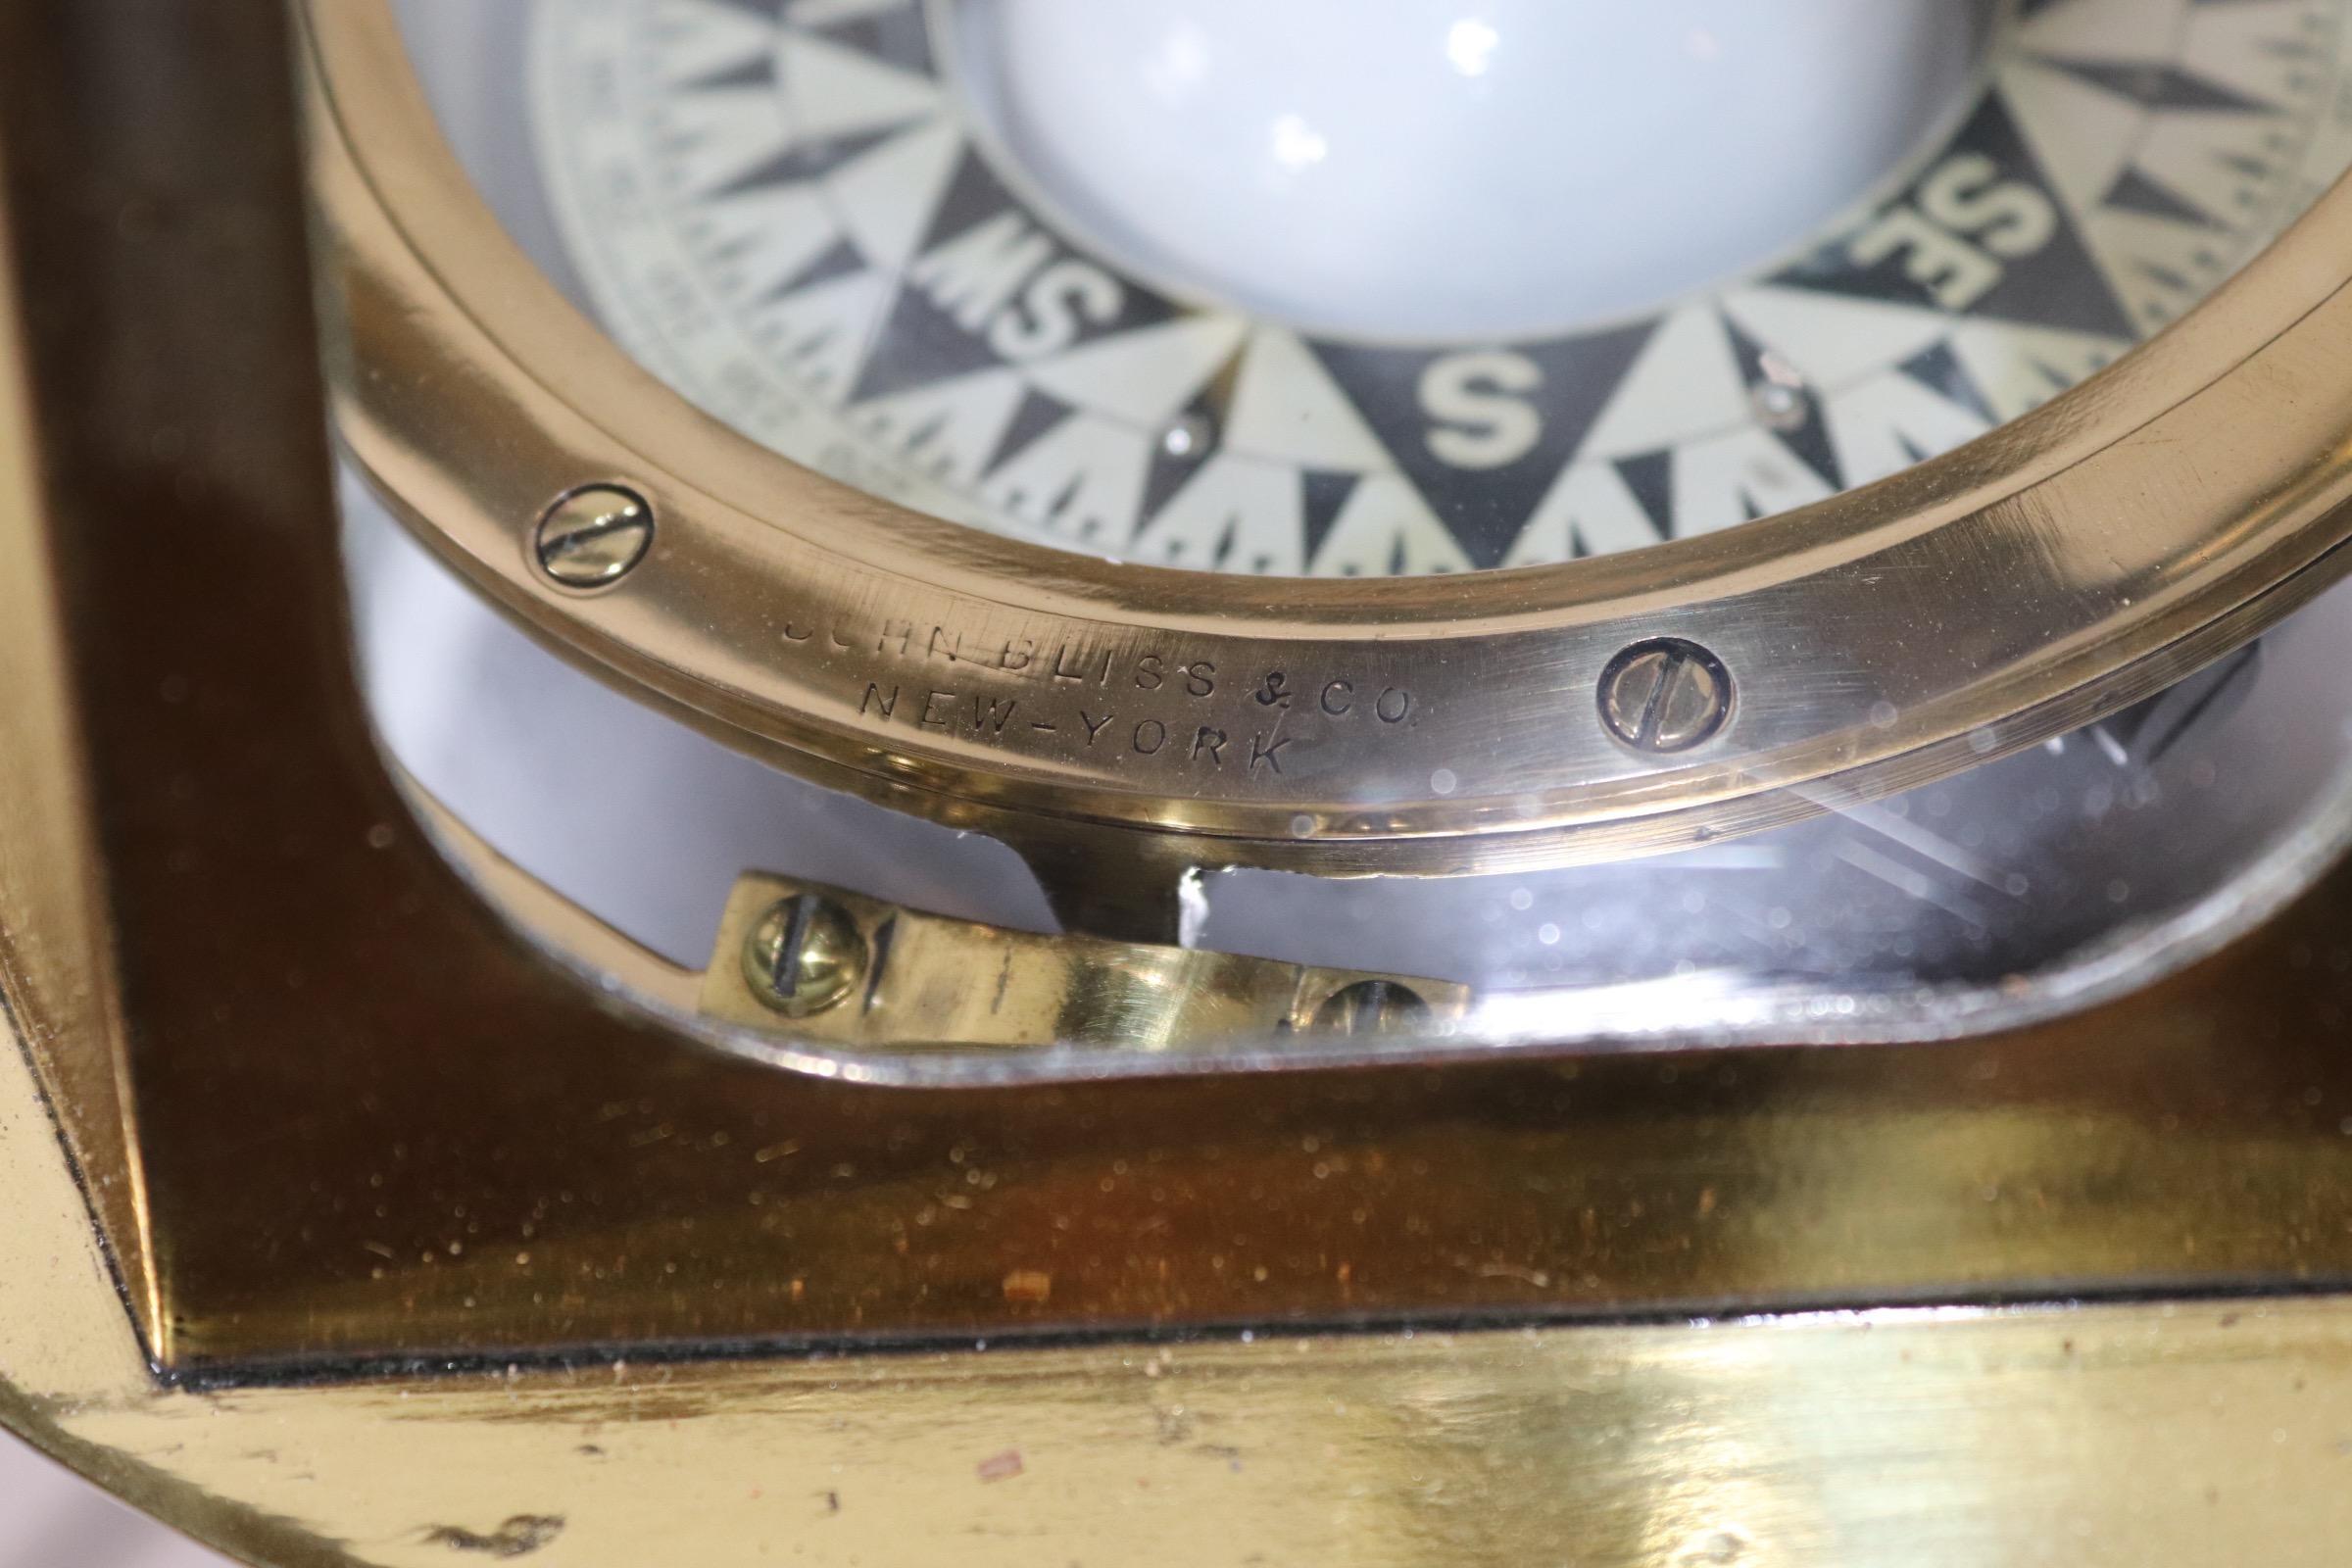 Skylight Yacht Binnacle Compass In Good Condition For Sale In Norwell, MA